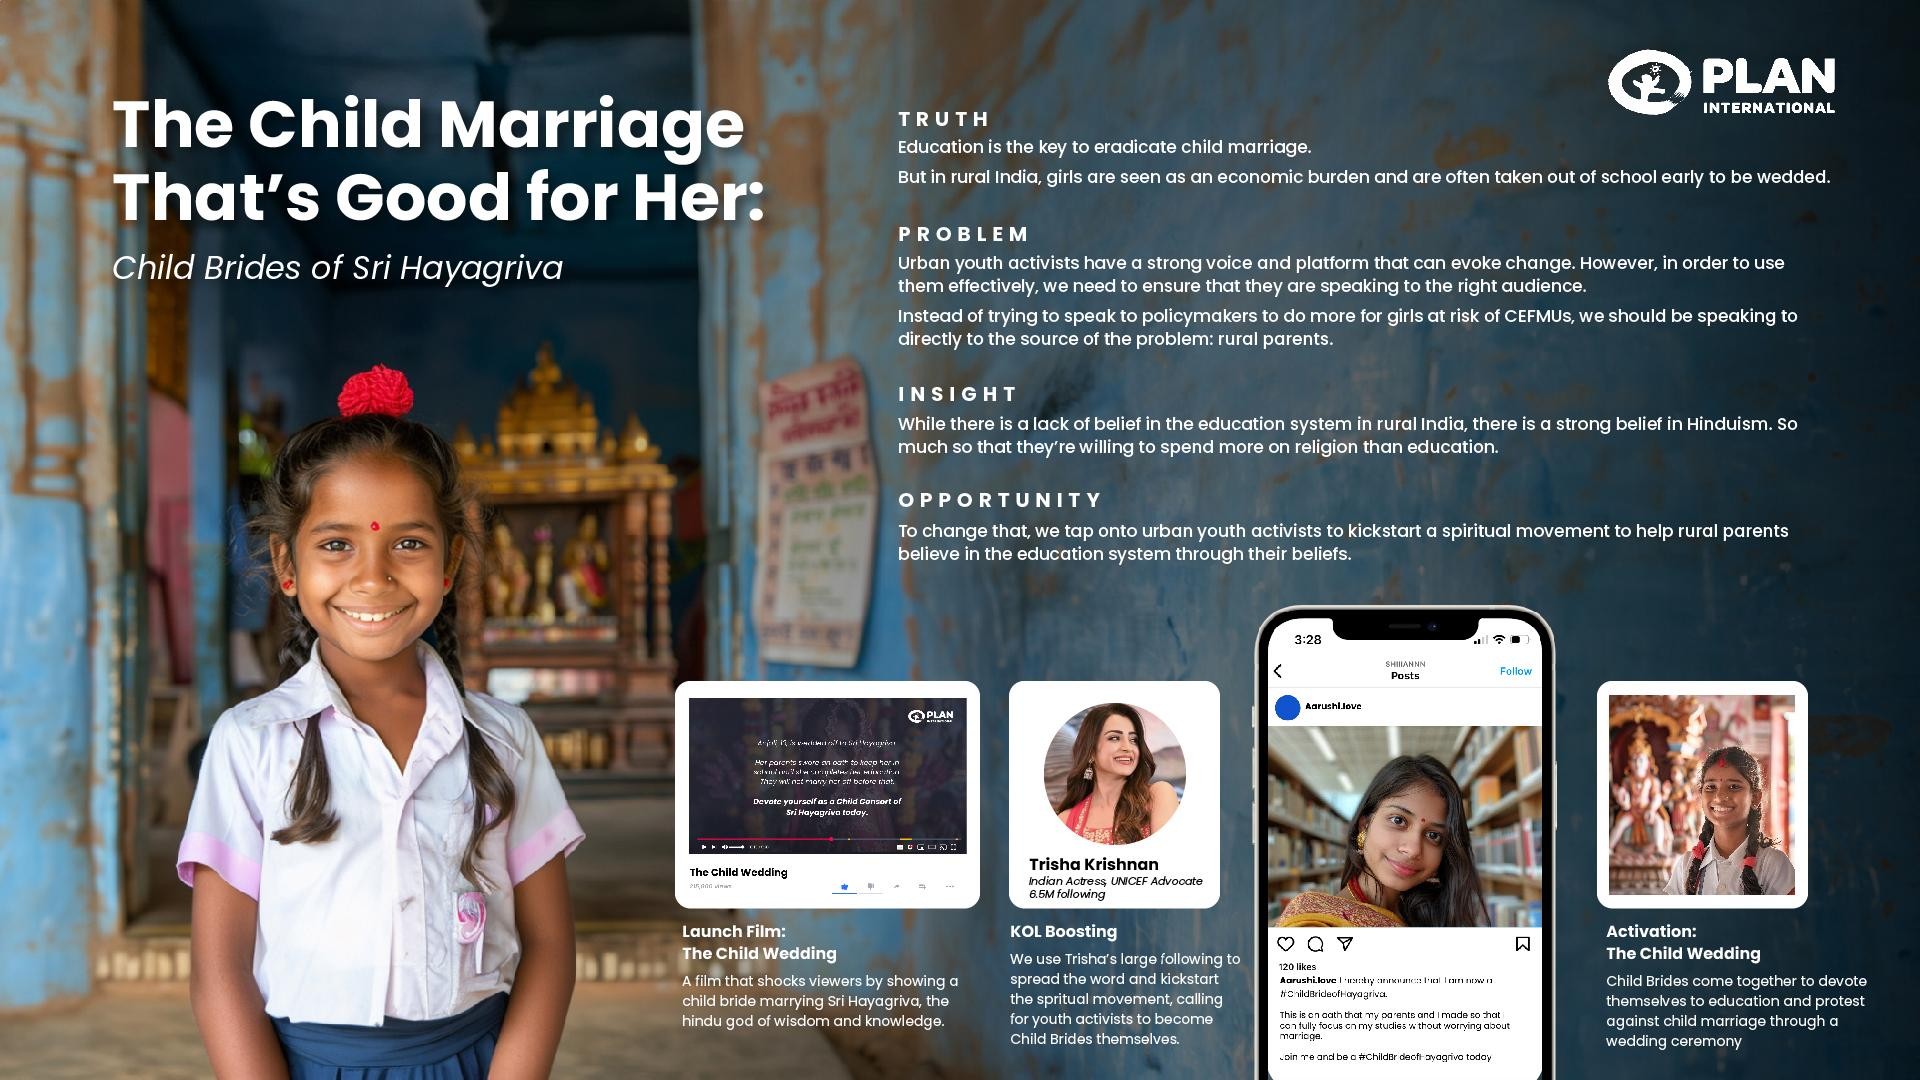 The Child Marriage That’s Good for Her: Child Brides of Sri Hayagriva